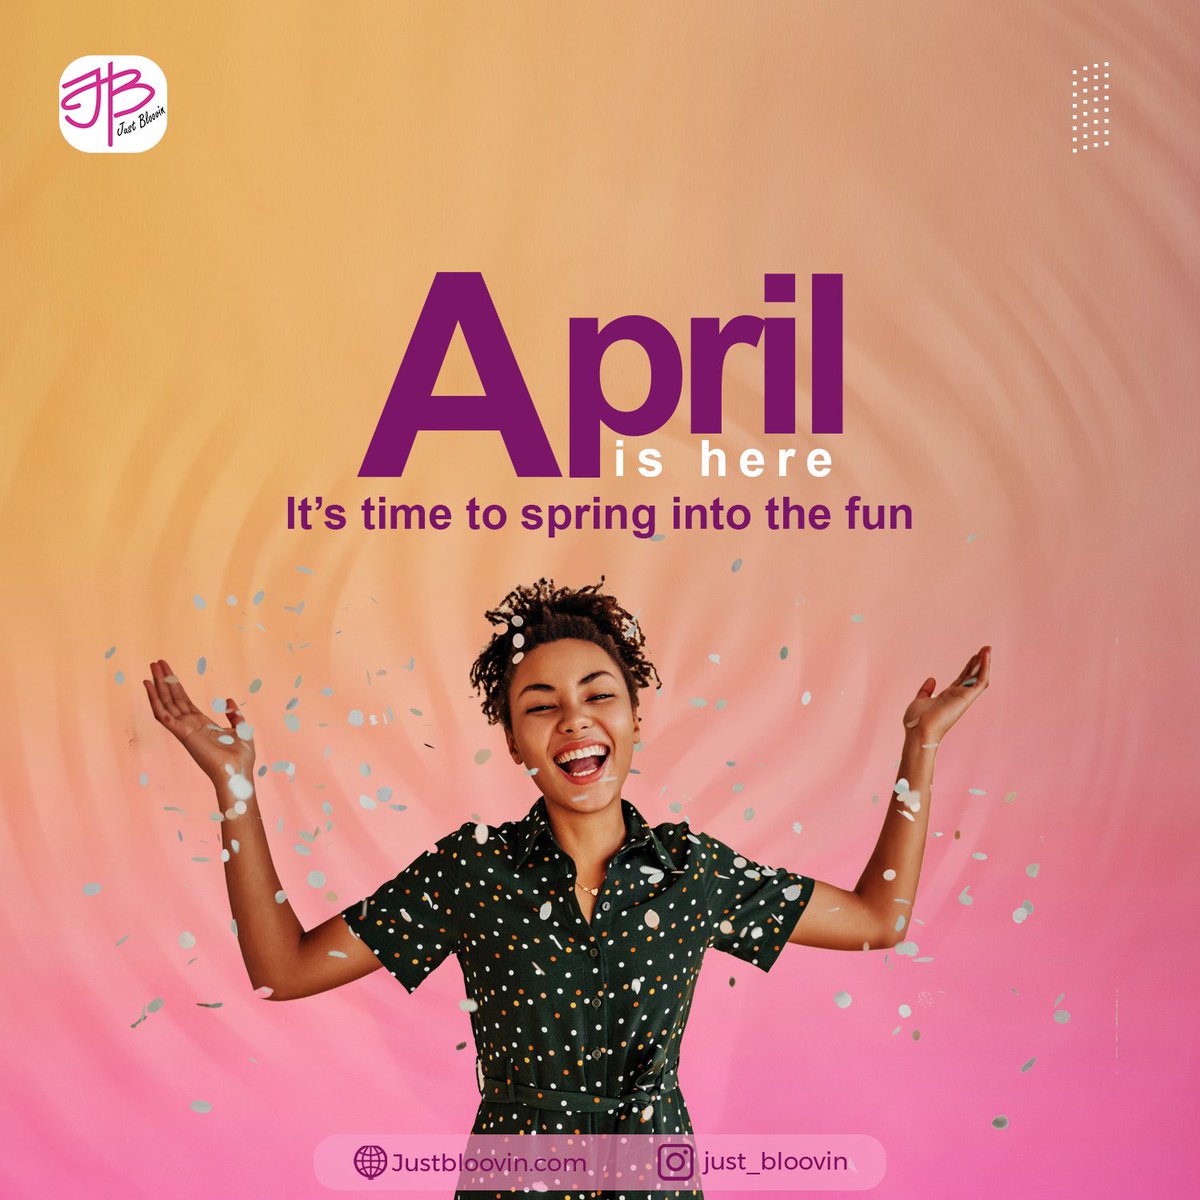 Happy new month! Let's make every day count and create memories that will last a lifetime.

#ibloov #justbloovin #weekend #360camera #silentdisco #silentdiscoheadset #photobooth #silentparty #april #aprilfoolday #aprilfool